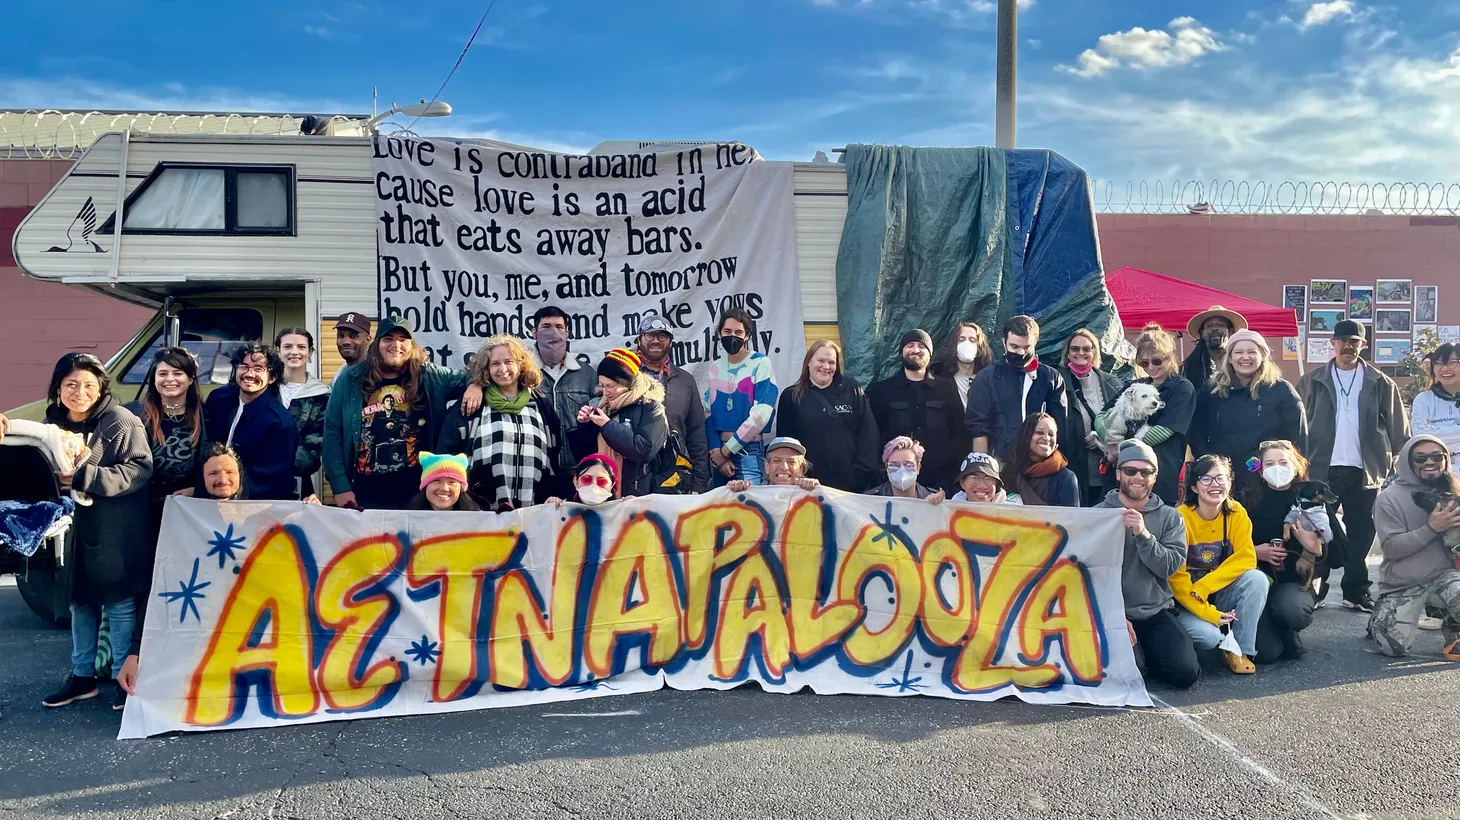 Aetna Street residents’ annual “Aetnapalooza” festival aims to distribute resources and draw awareness to the City of LA’s anti-camping ordinance.